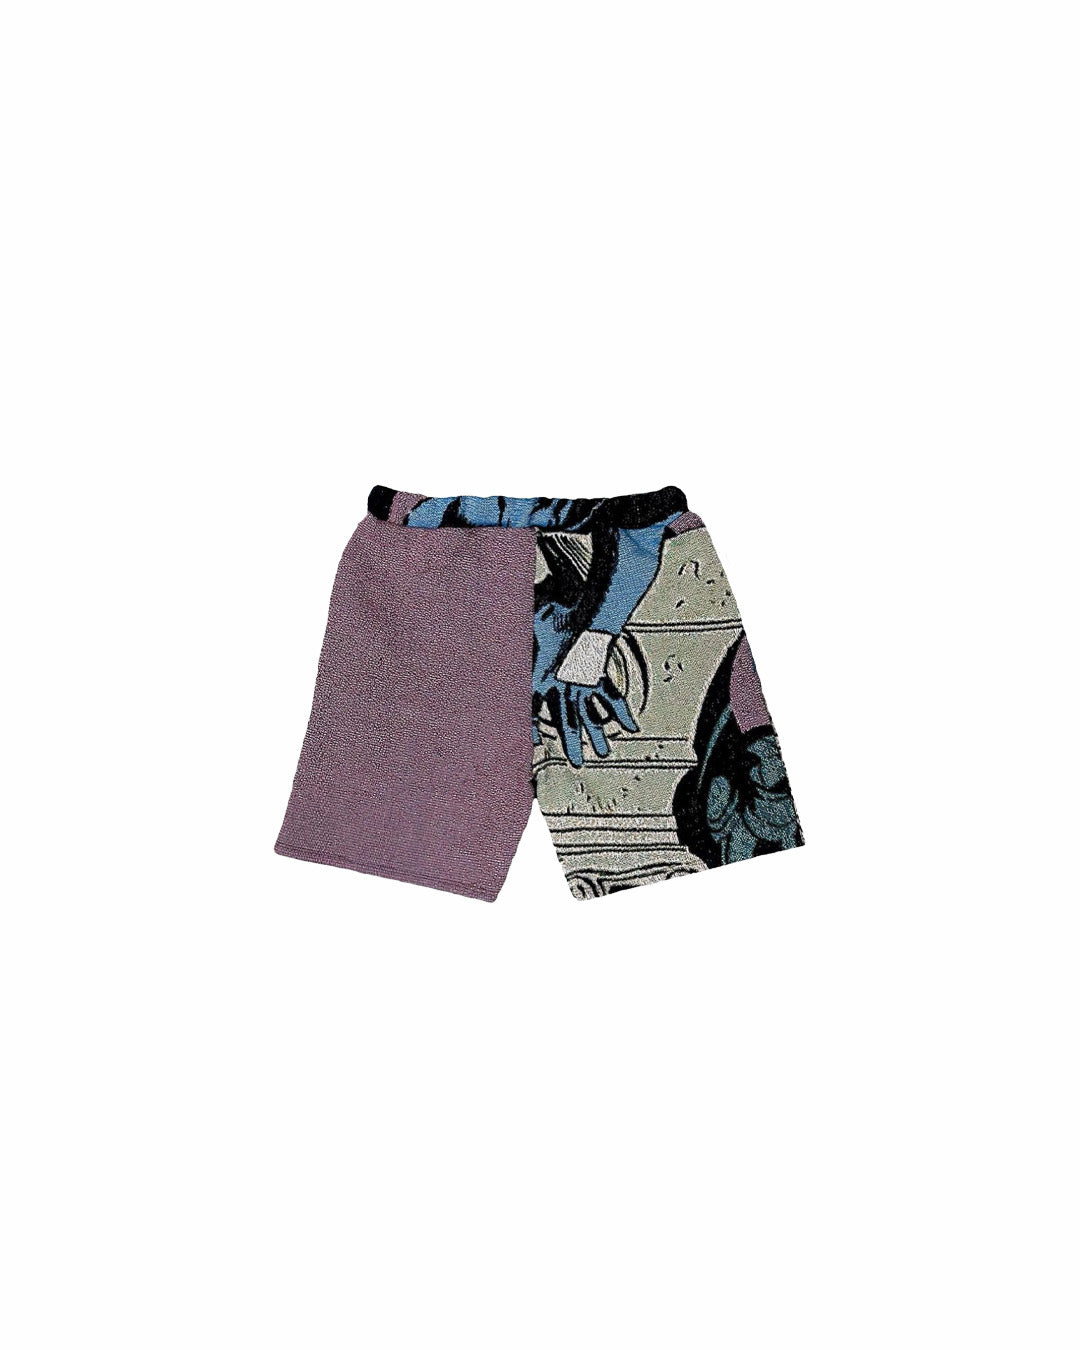 SYMBIOTE TAPESTRY SHORTS | PRE ORDER